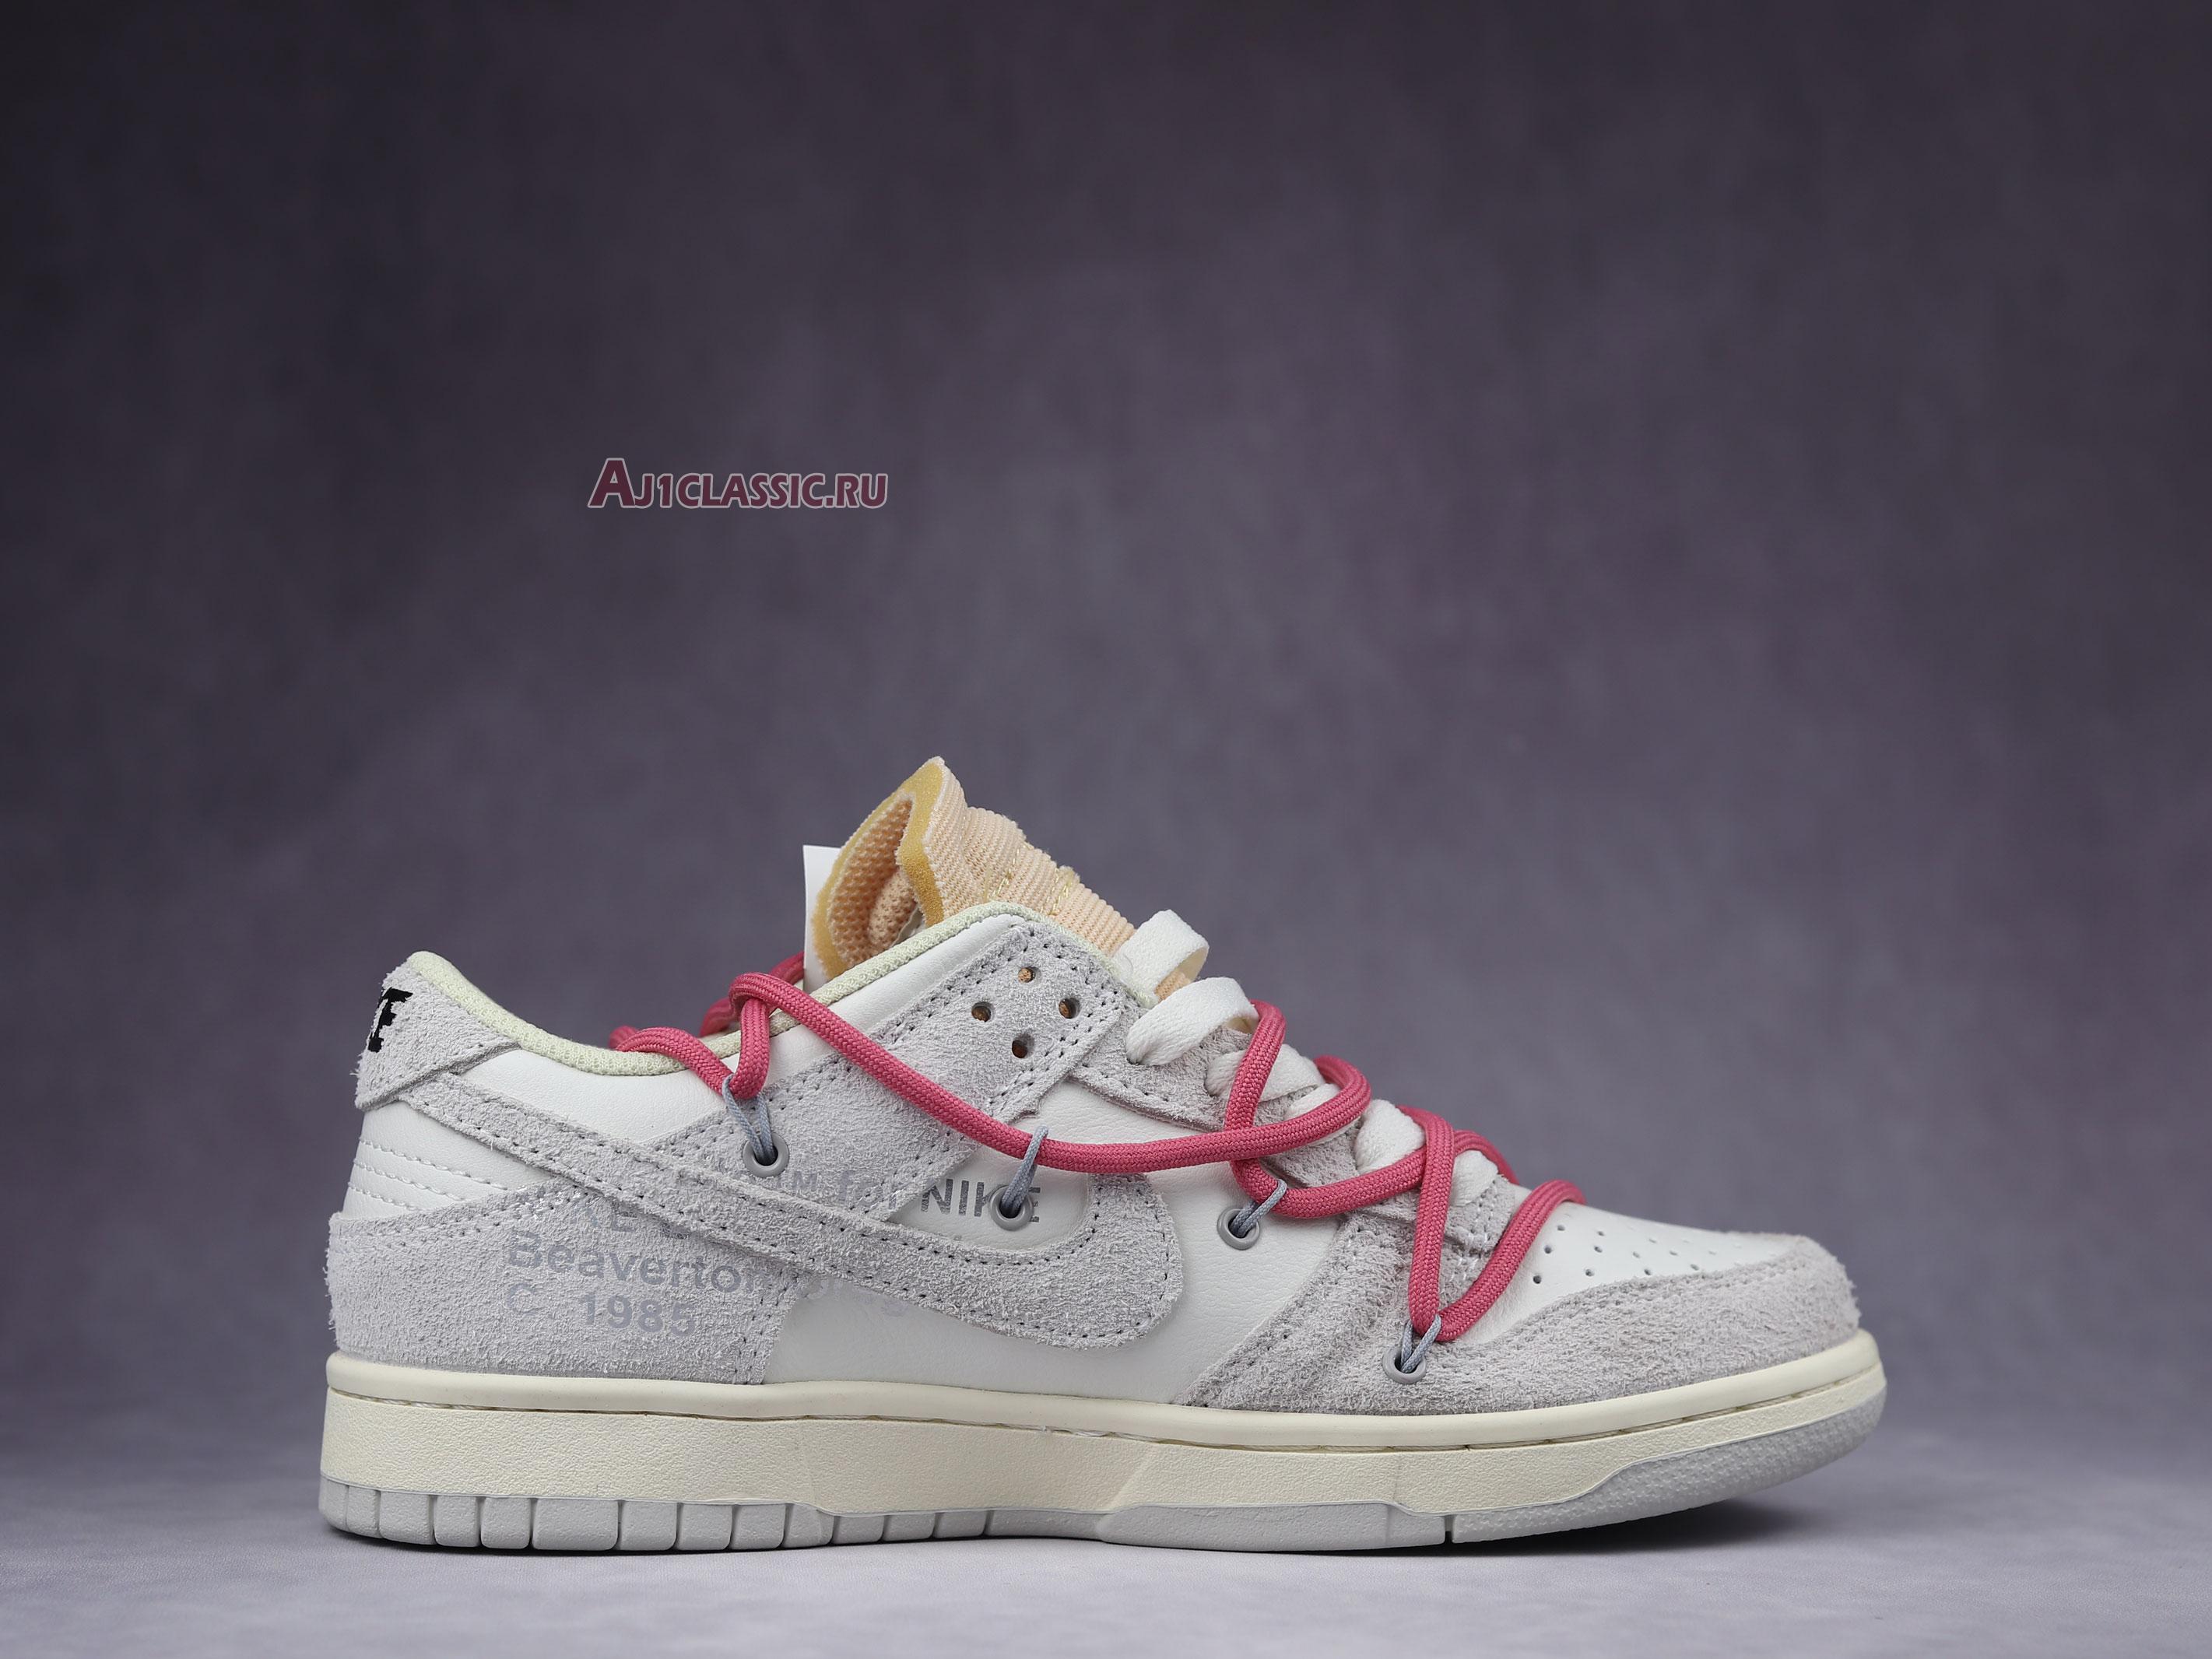 Off-White x Nike Dunk Low "Lot 17 of 50" DJ0950-117